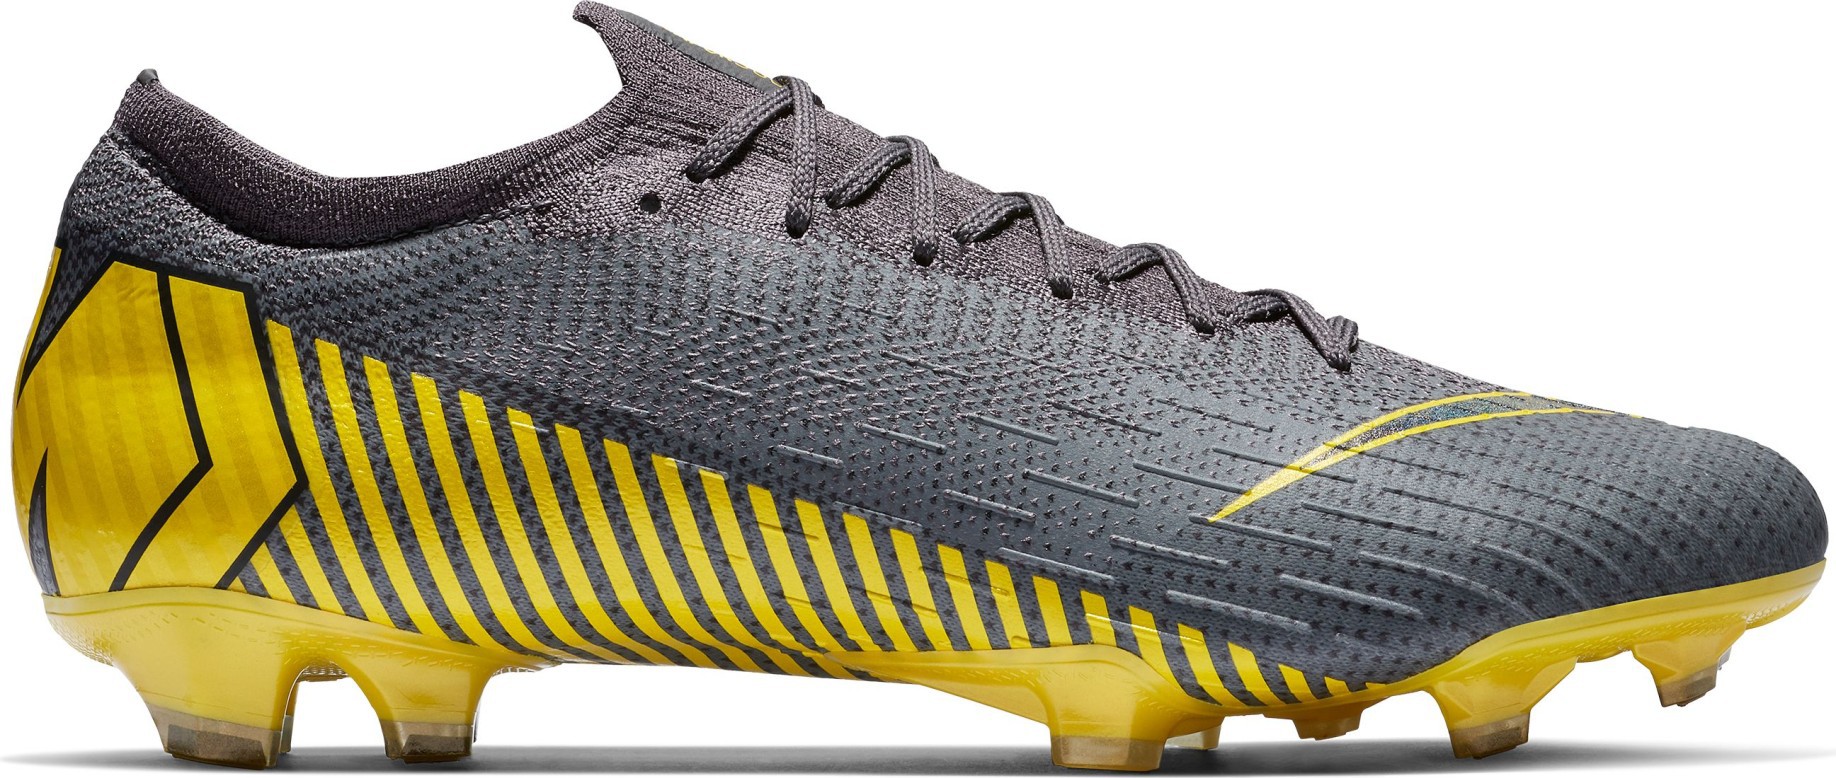 Nike Mercurial Vapor 13 Elite Leather Tech Craft Pack Review